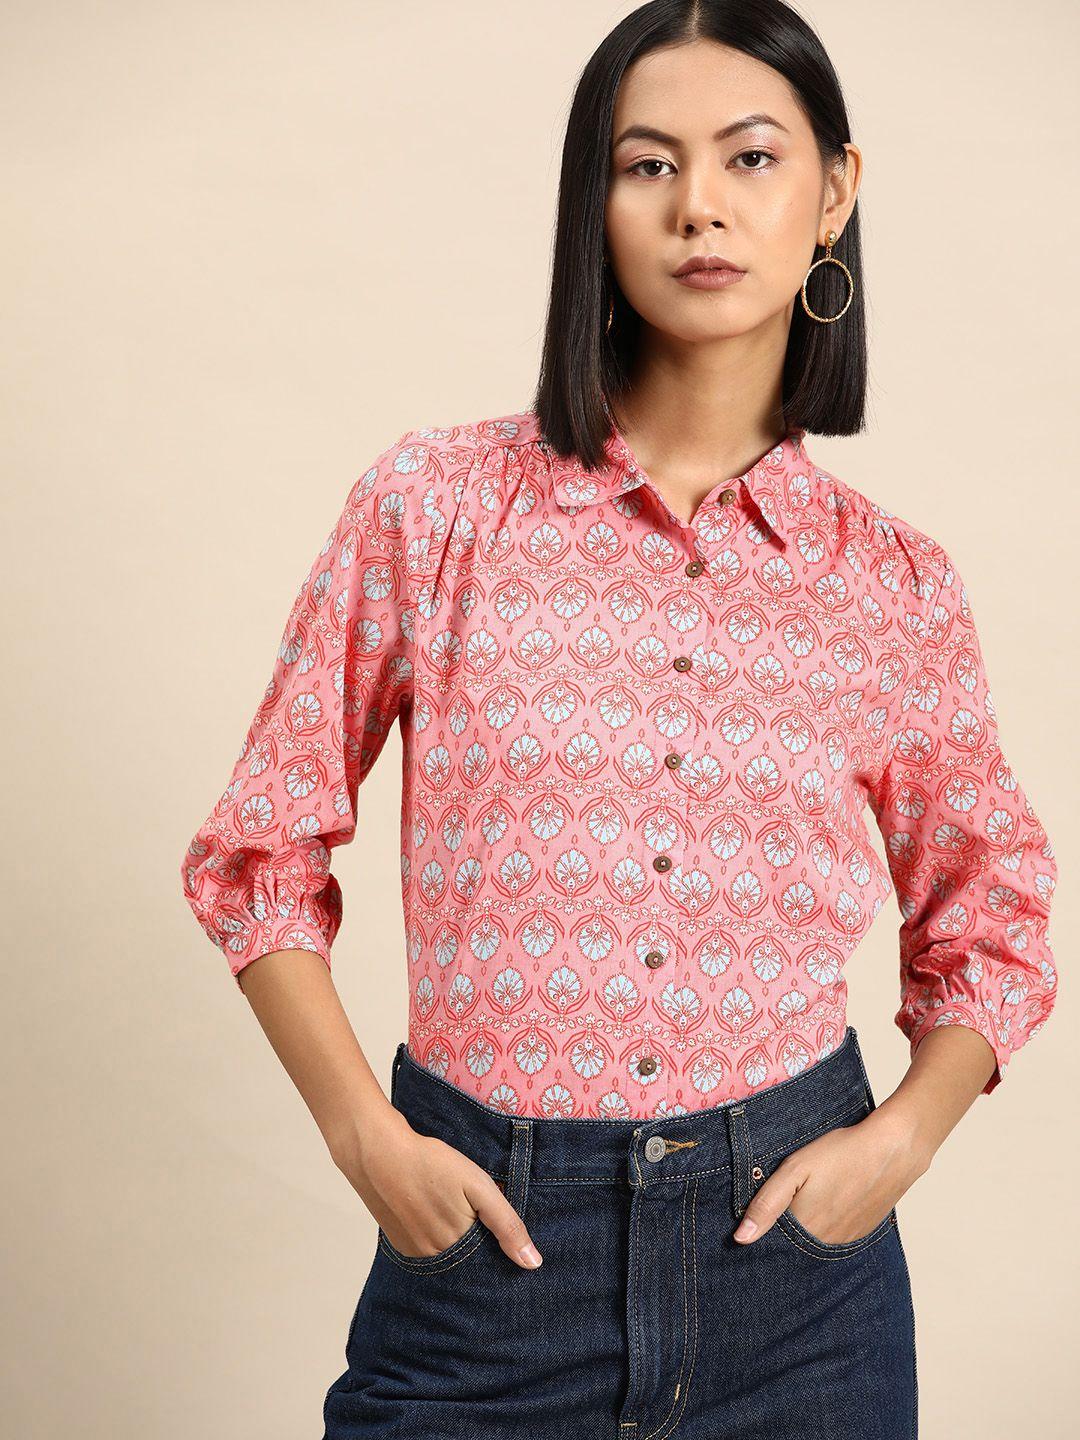 all about you ethnic print cotton shirt style top